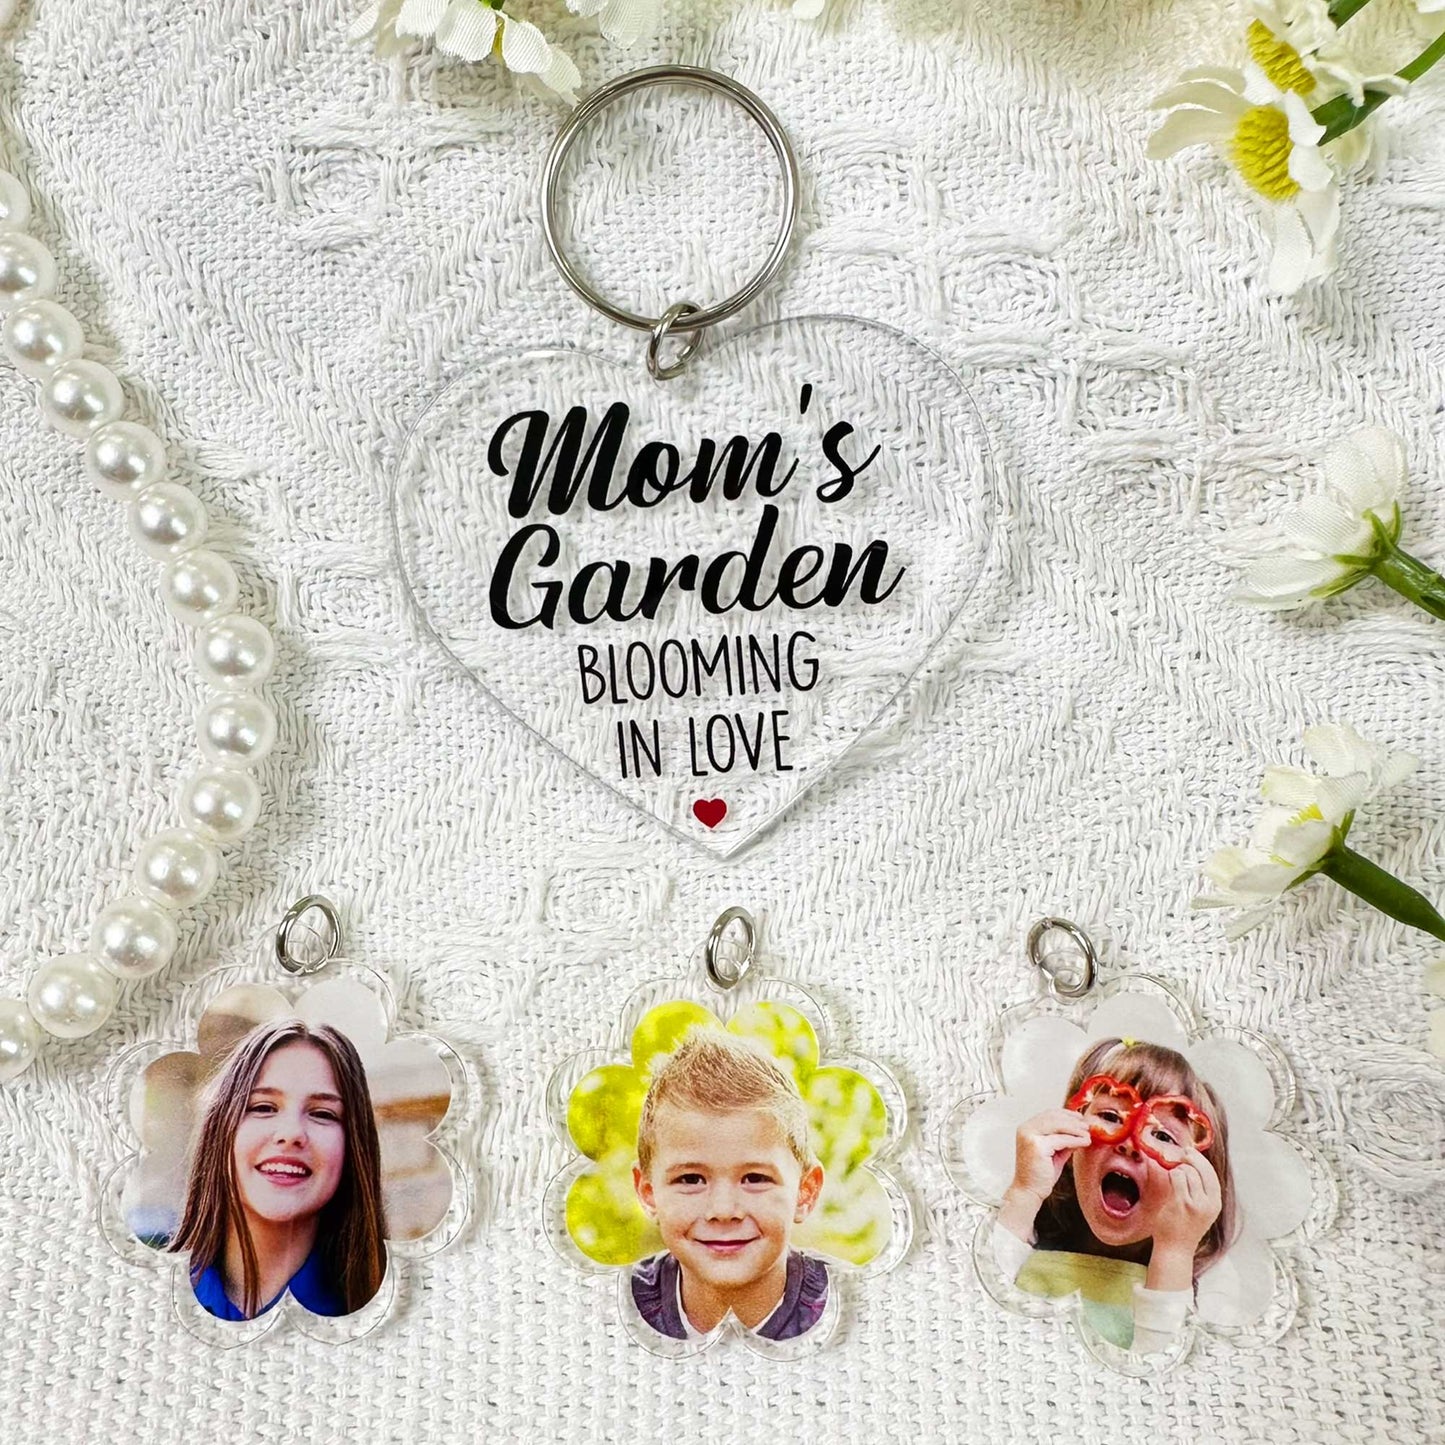 Blooming In Love - Personalized Acrylic Photo Keychain